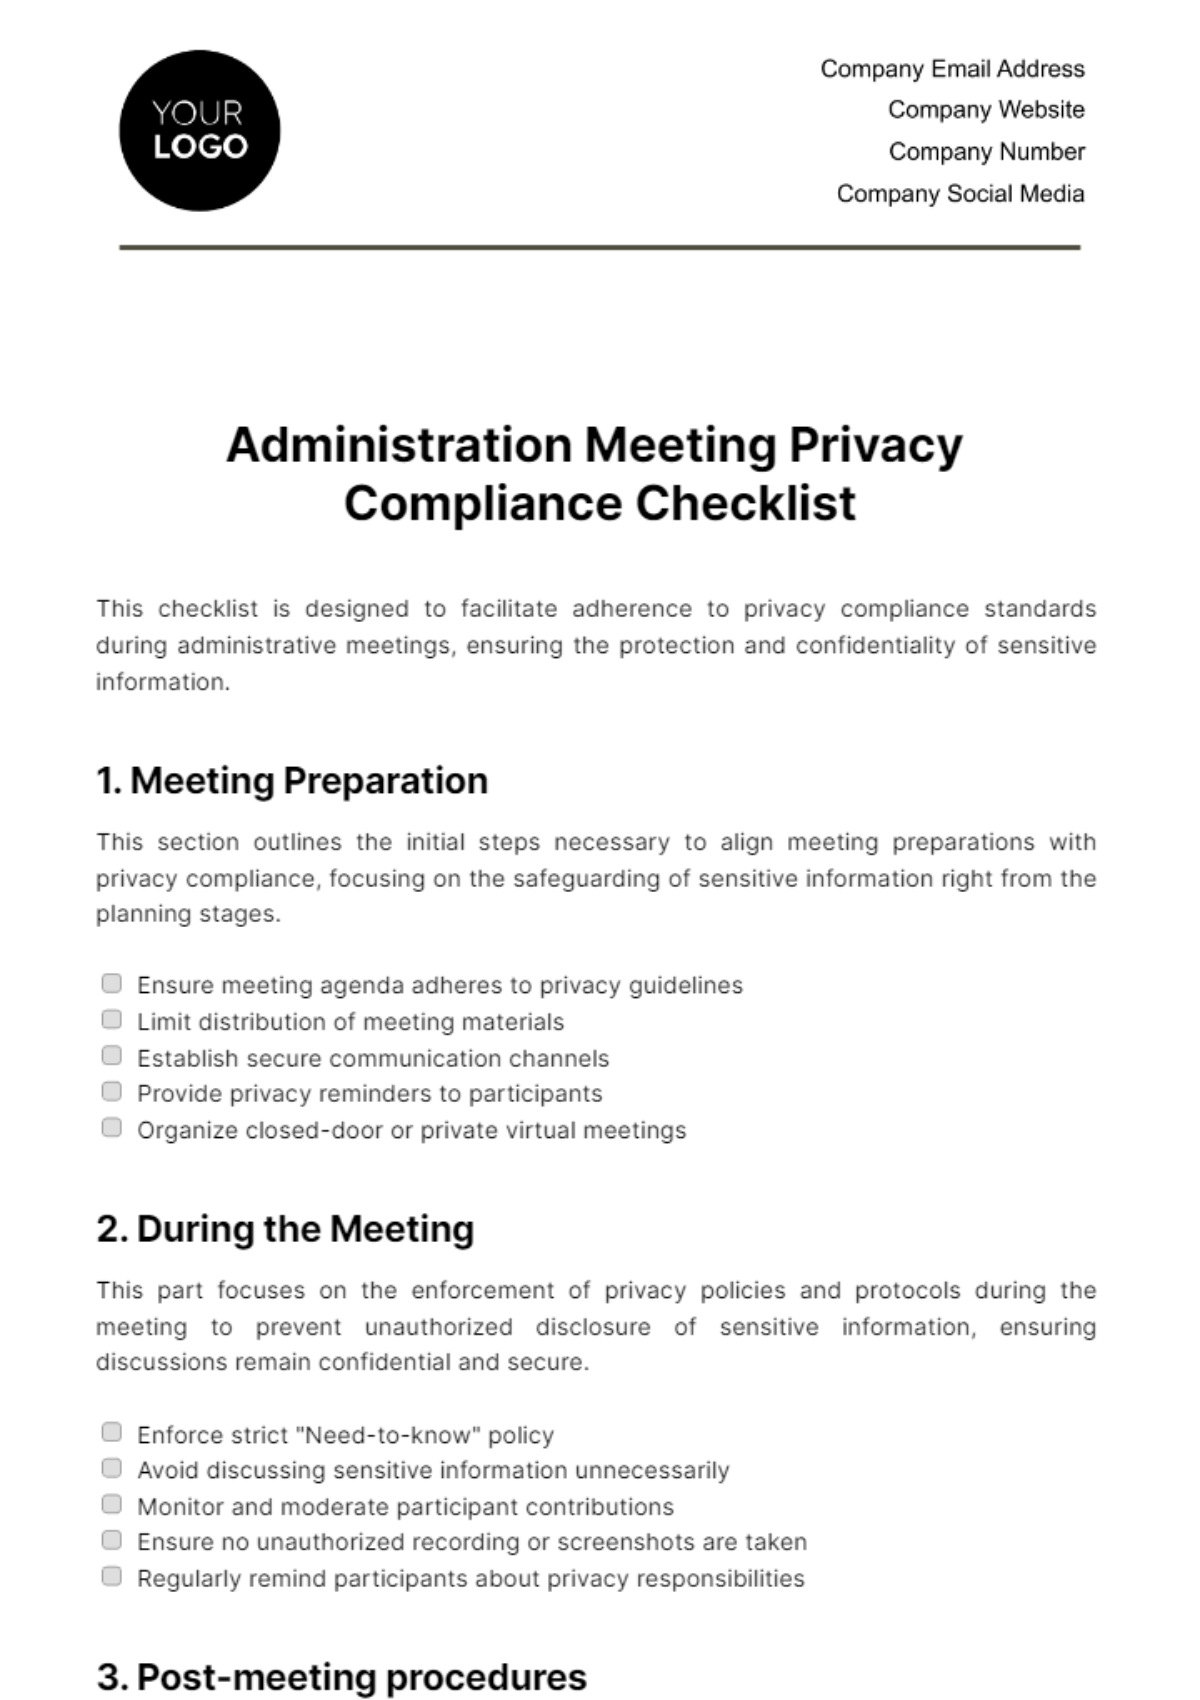 Administration Meeting Privacy Compliance Checklist Template